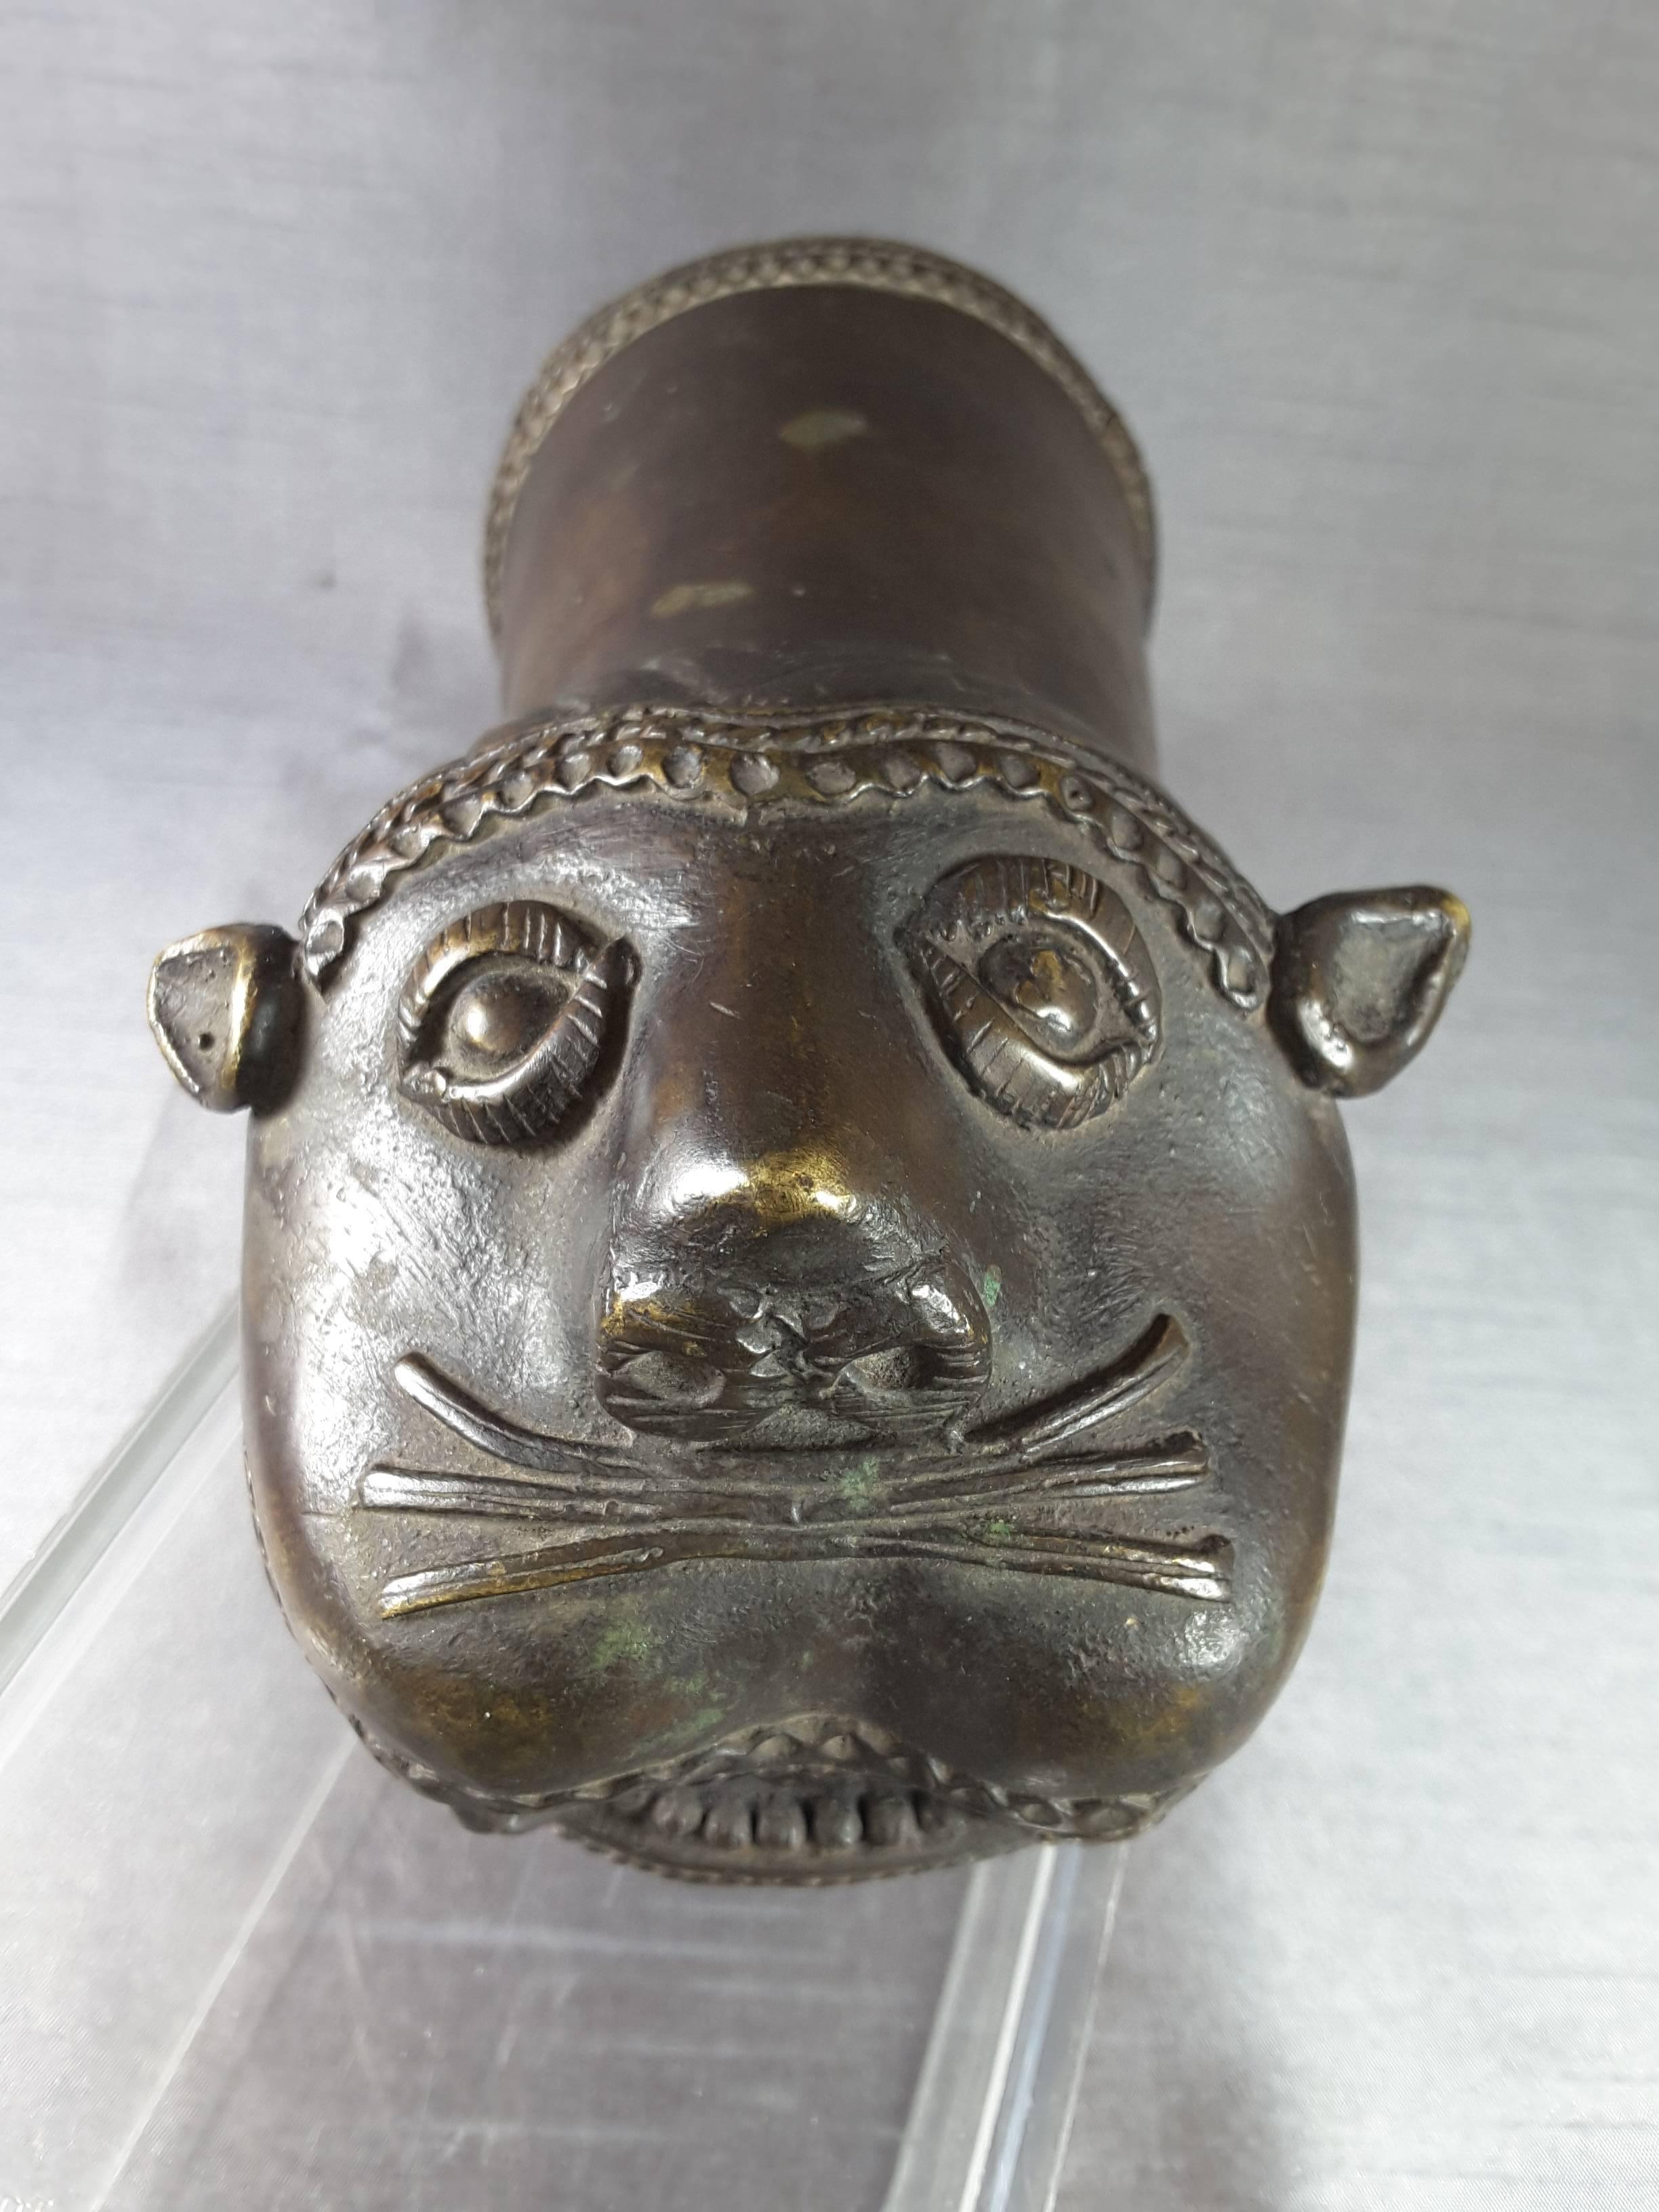 18th-19th century palanquin mythical tiger finial handle in bronze, in a nice rich dark brown patina, unpolished and uncleansed (as found condition). Palanquins were used for transportation of people of wealth and power in India and the East.